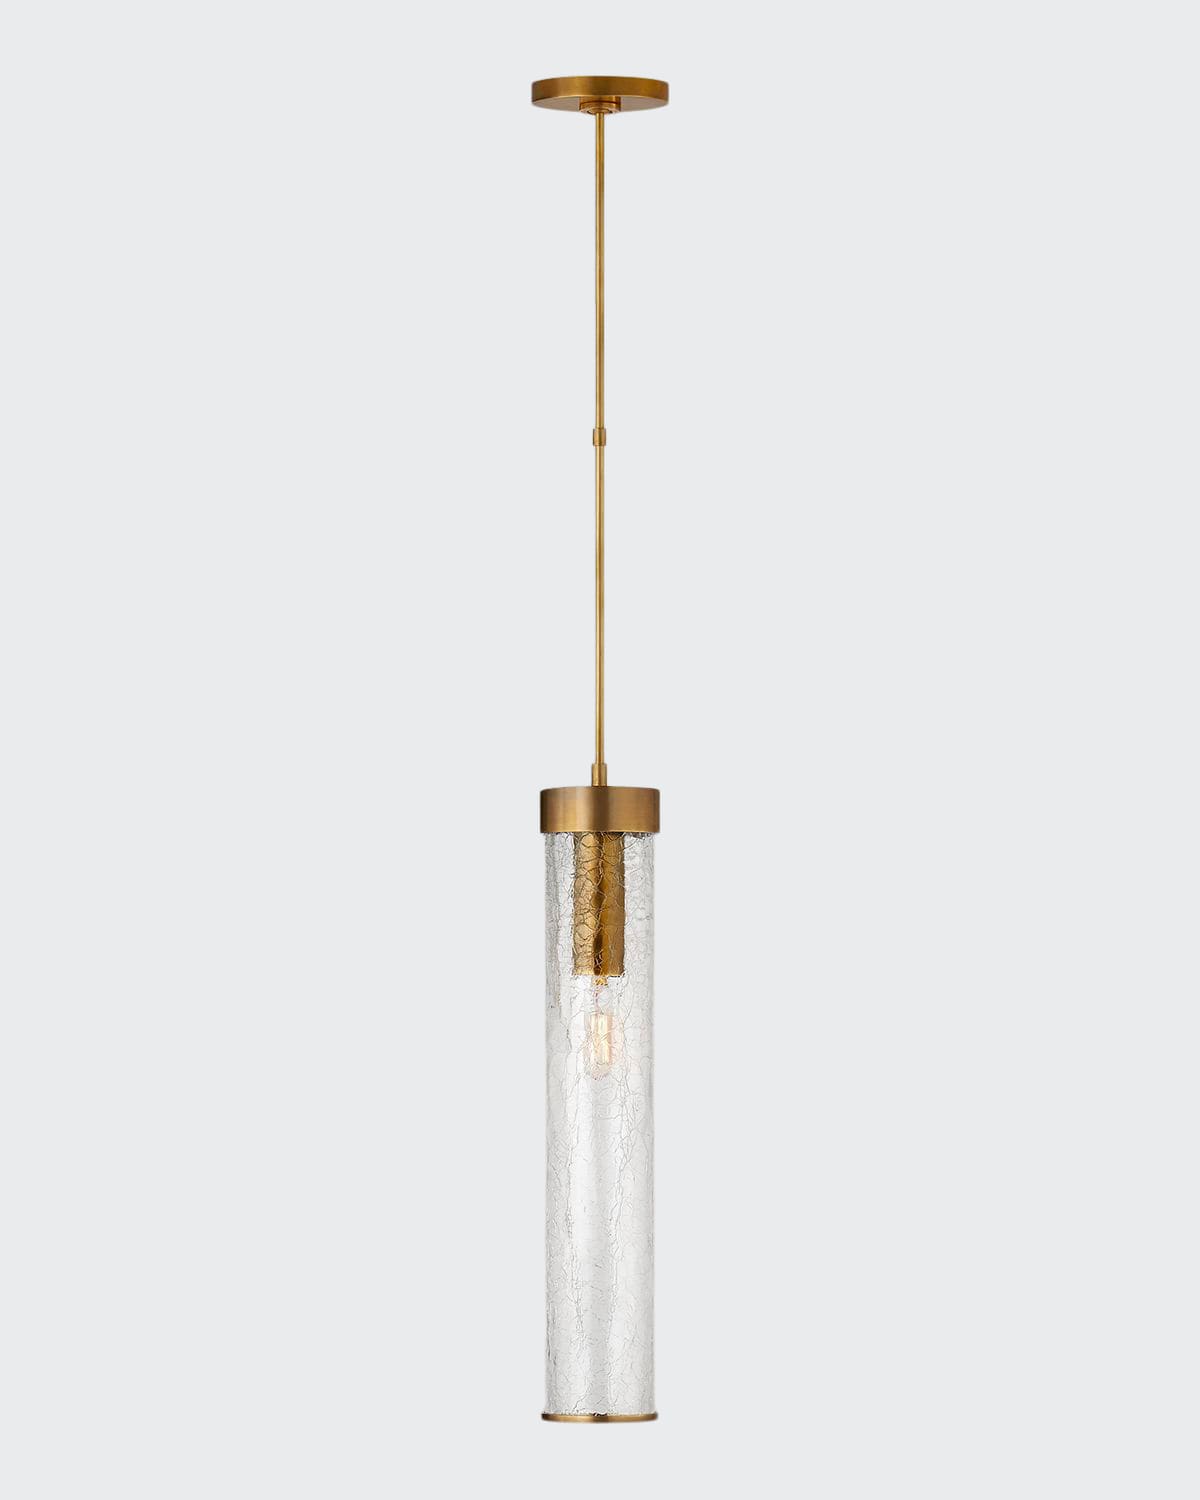 Kelly Wearstler For Visual Comfort Signature Liaison Long Pendant In Antique Brass